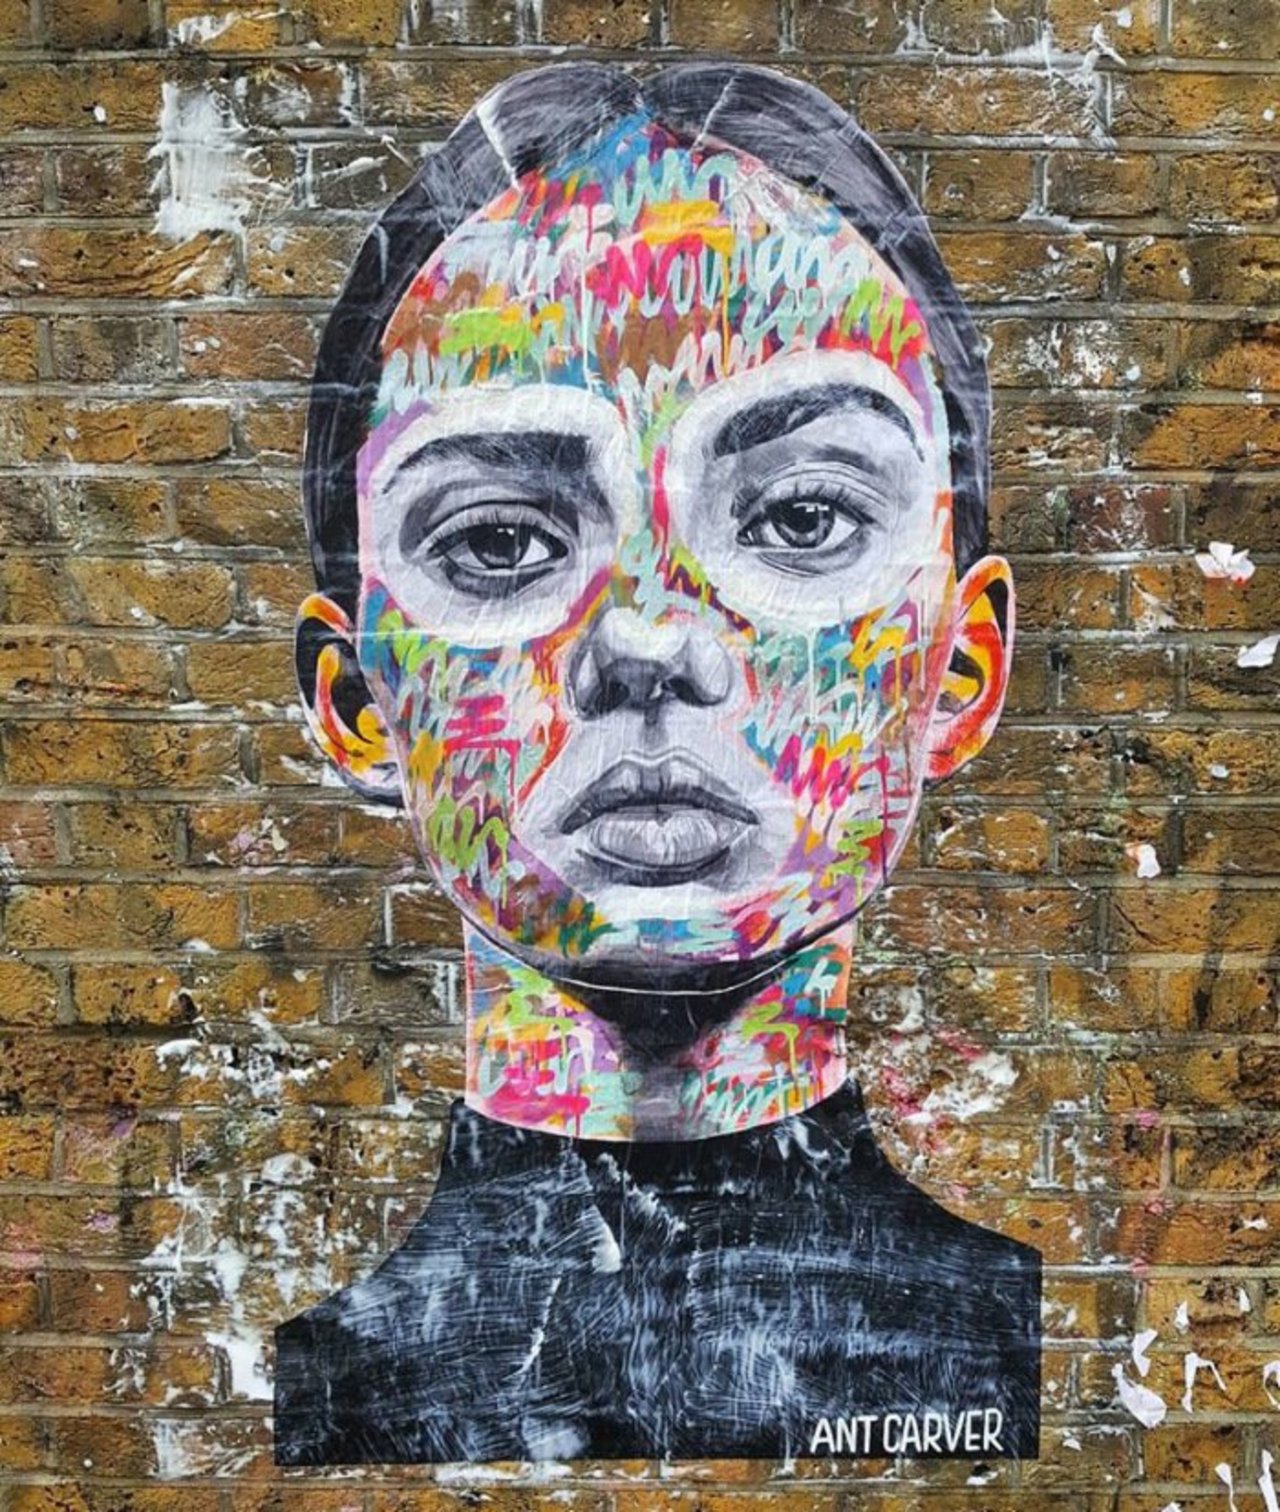 Beauty Thief by Ant Carver – #Creative #StreetArt | Be ▲rtist - Be ▲rt https://beartistbeart.com/2016/10/31/beauty-thief-by-ant-carver-creative-streetart/?utm_campaign=crowdfire&utm_content=crowdfire&utm_medium=social&utm_source=twitter https://t.co/GxPgH393yI